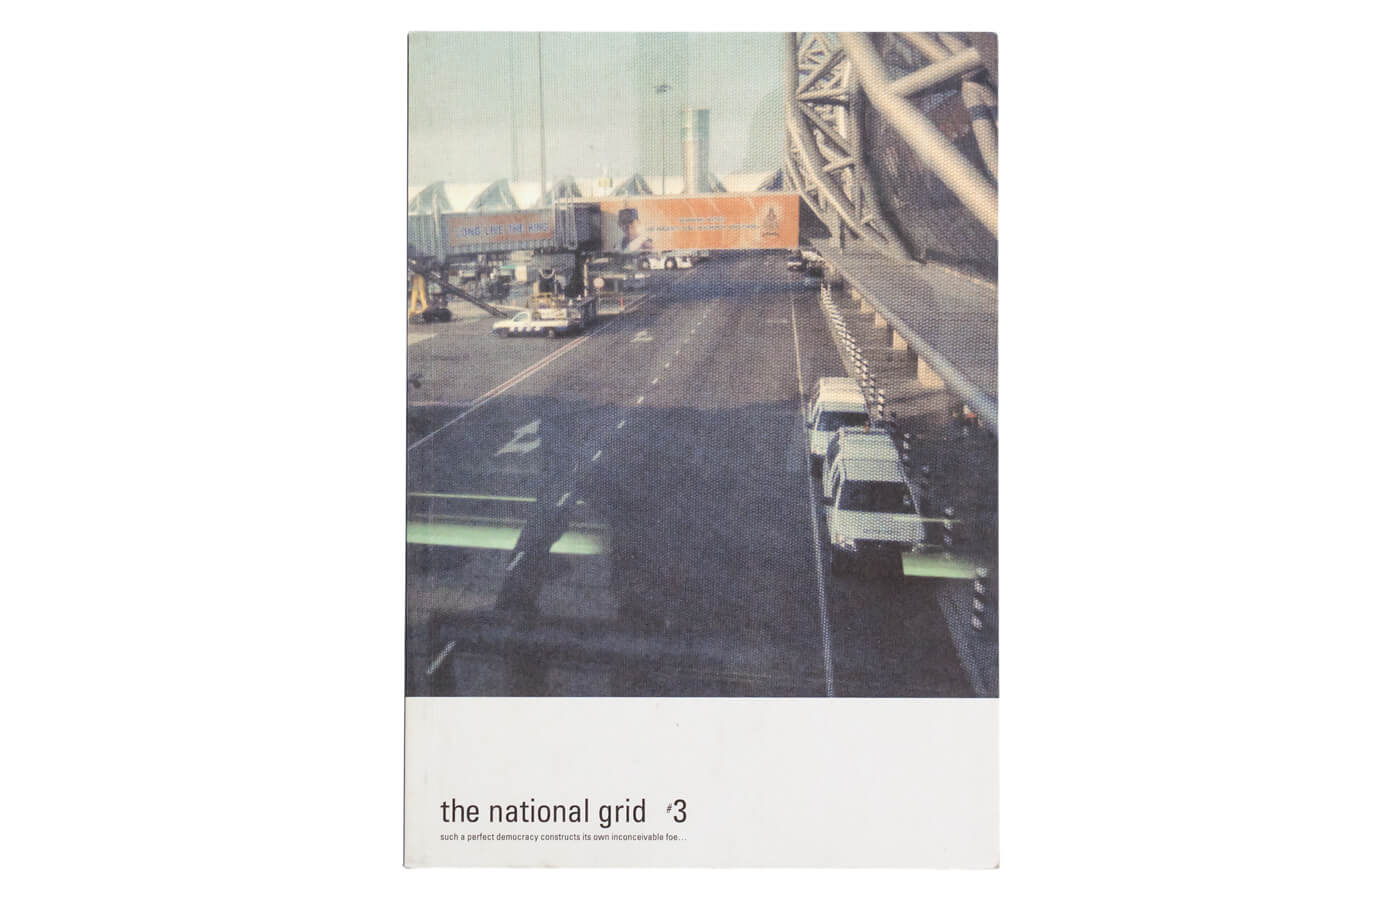 The National Grid #3